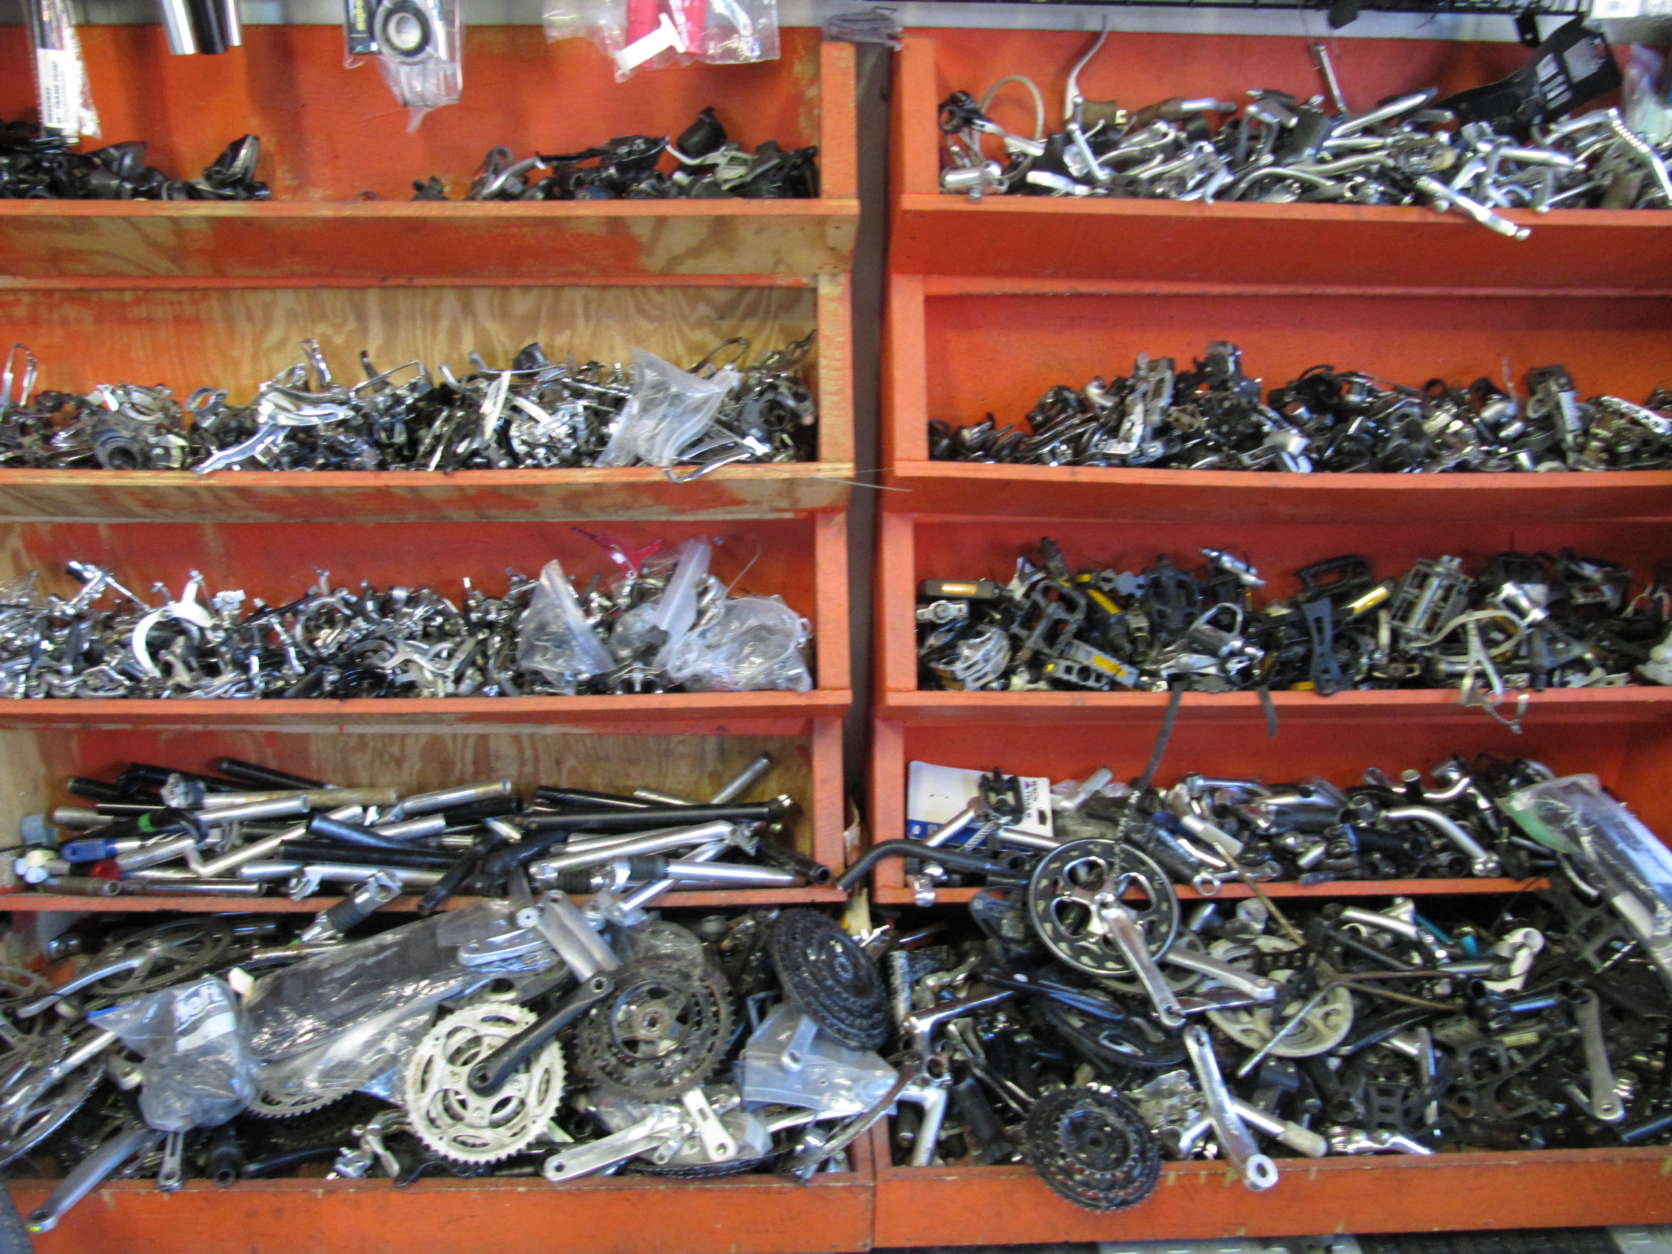 VeloCity Bicycle Cooperative in Alexandria, Virginia, sells used parts at a discount. (WTOP/Abigail Constantino)